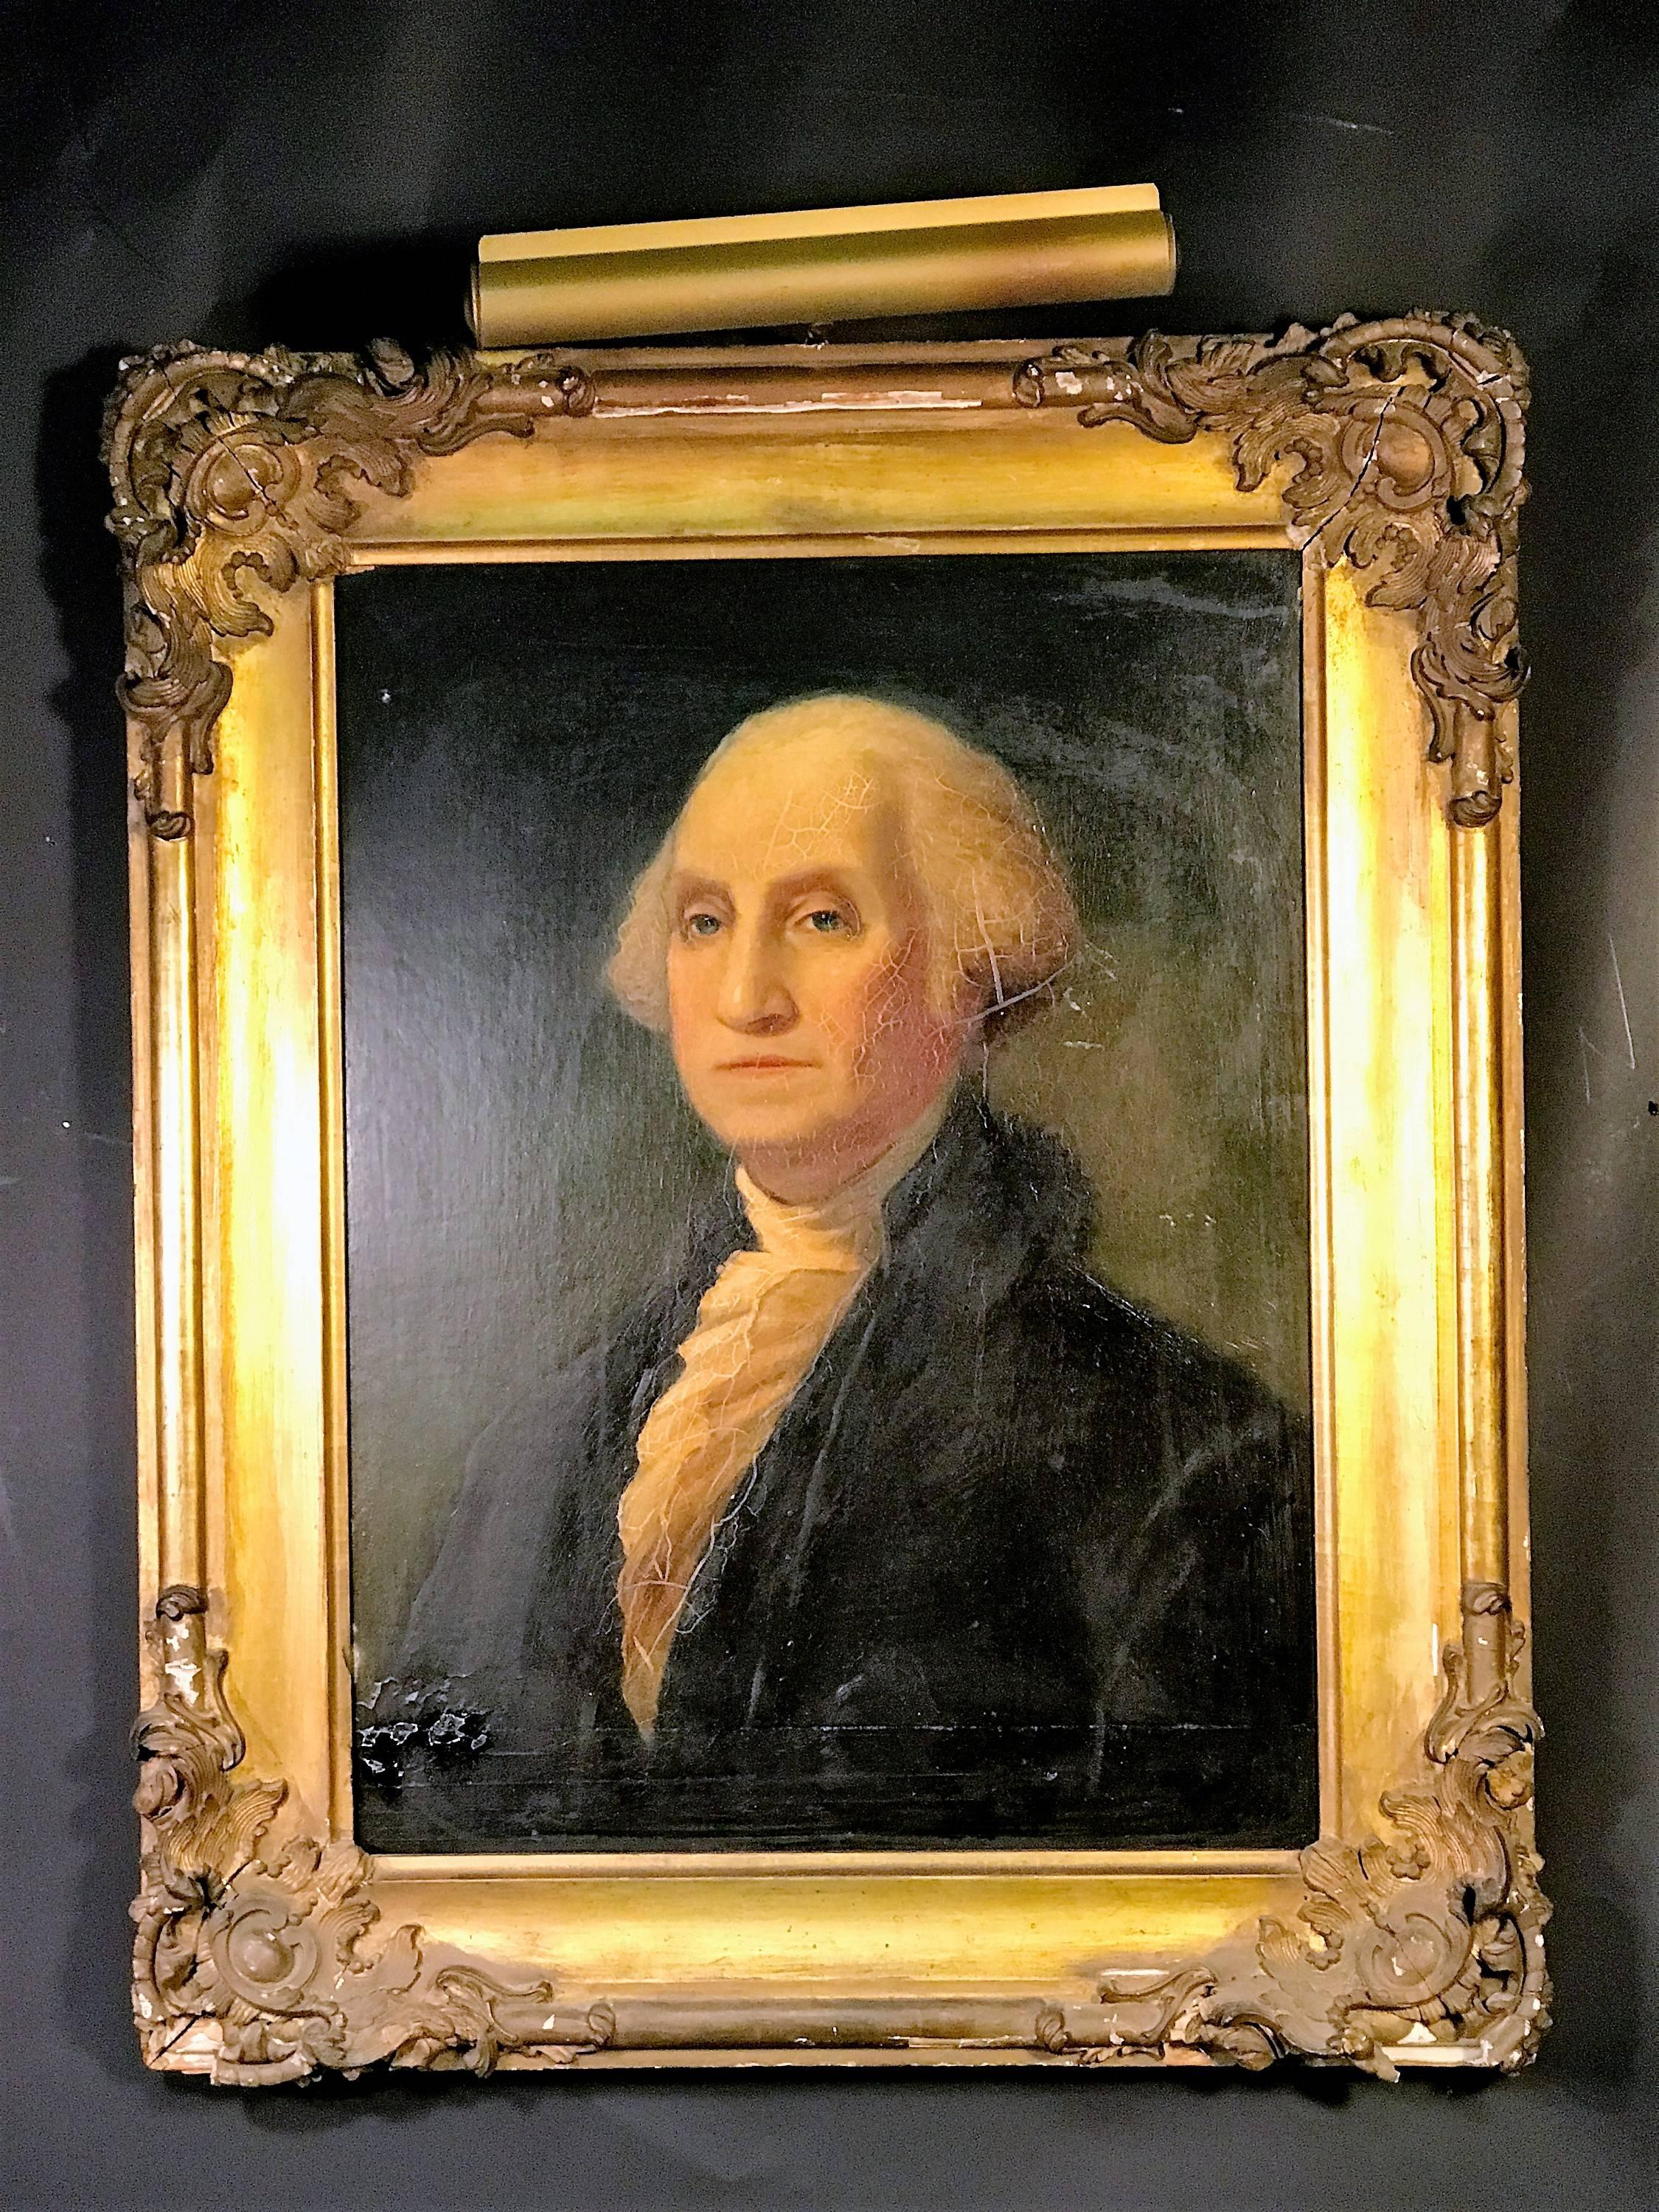 Great period 19th century oil painting on wood board of George Washington. In original elaborate gilded gesso and wood frame. Comes with gilt metal painting light affixed to the frame. Measurements of painting alone are 21 1/2 inches wide and 29